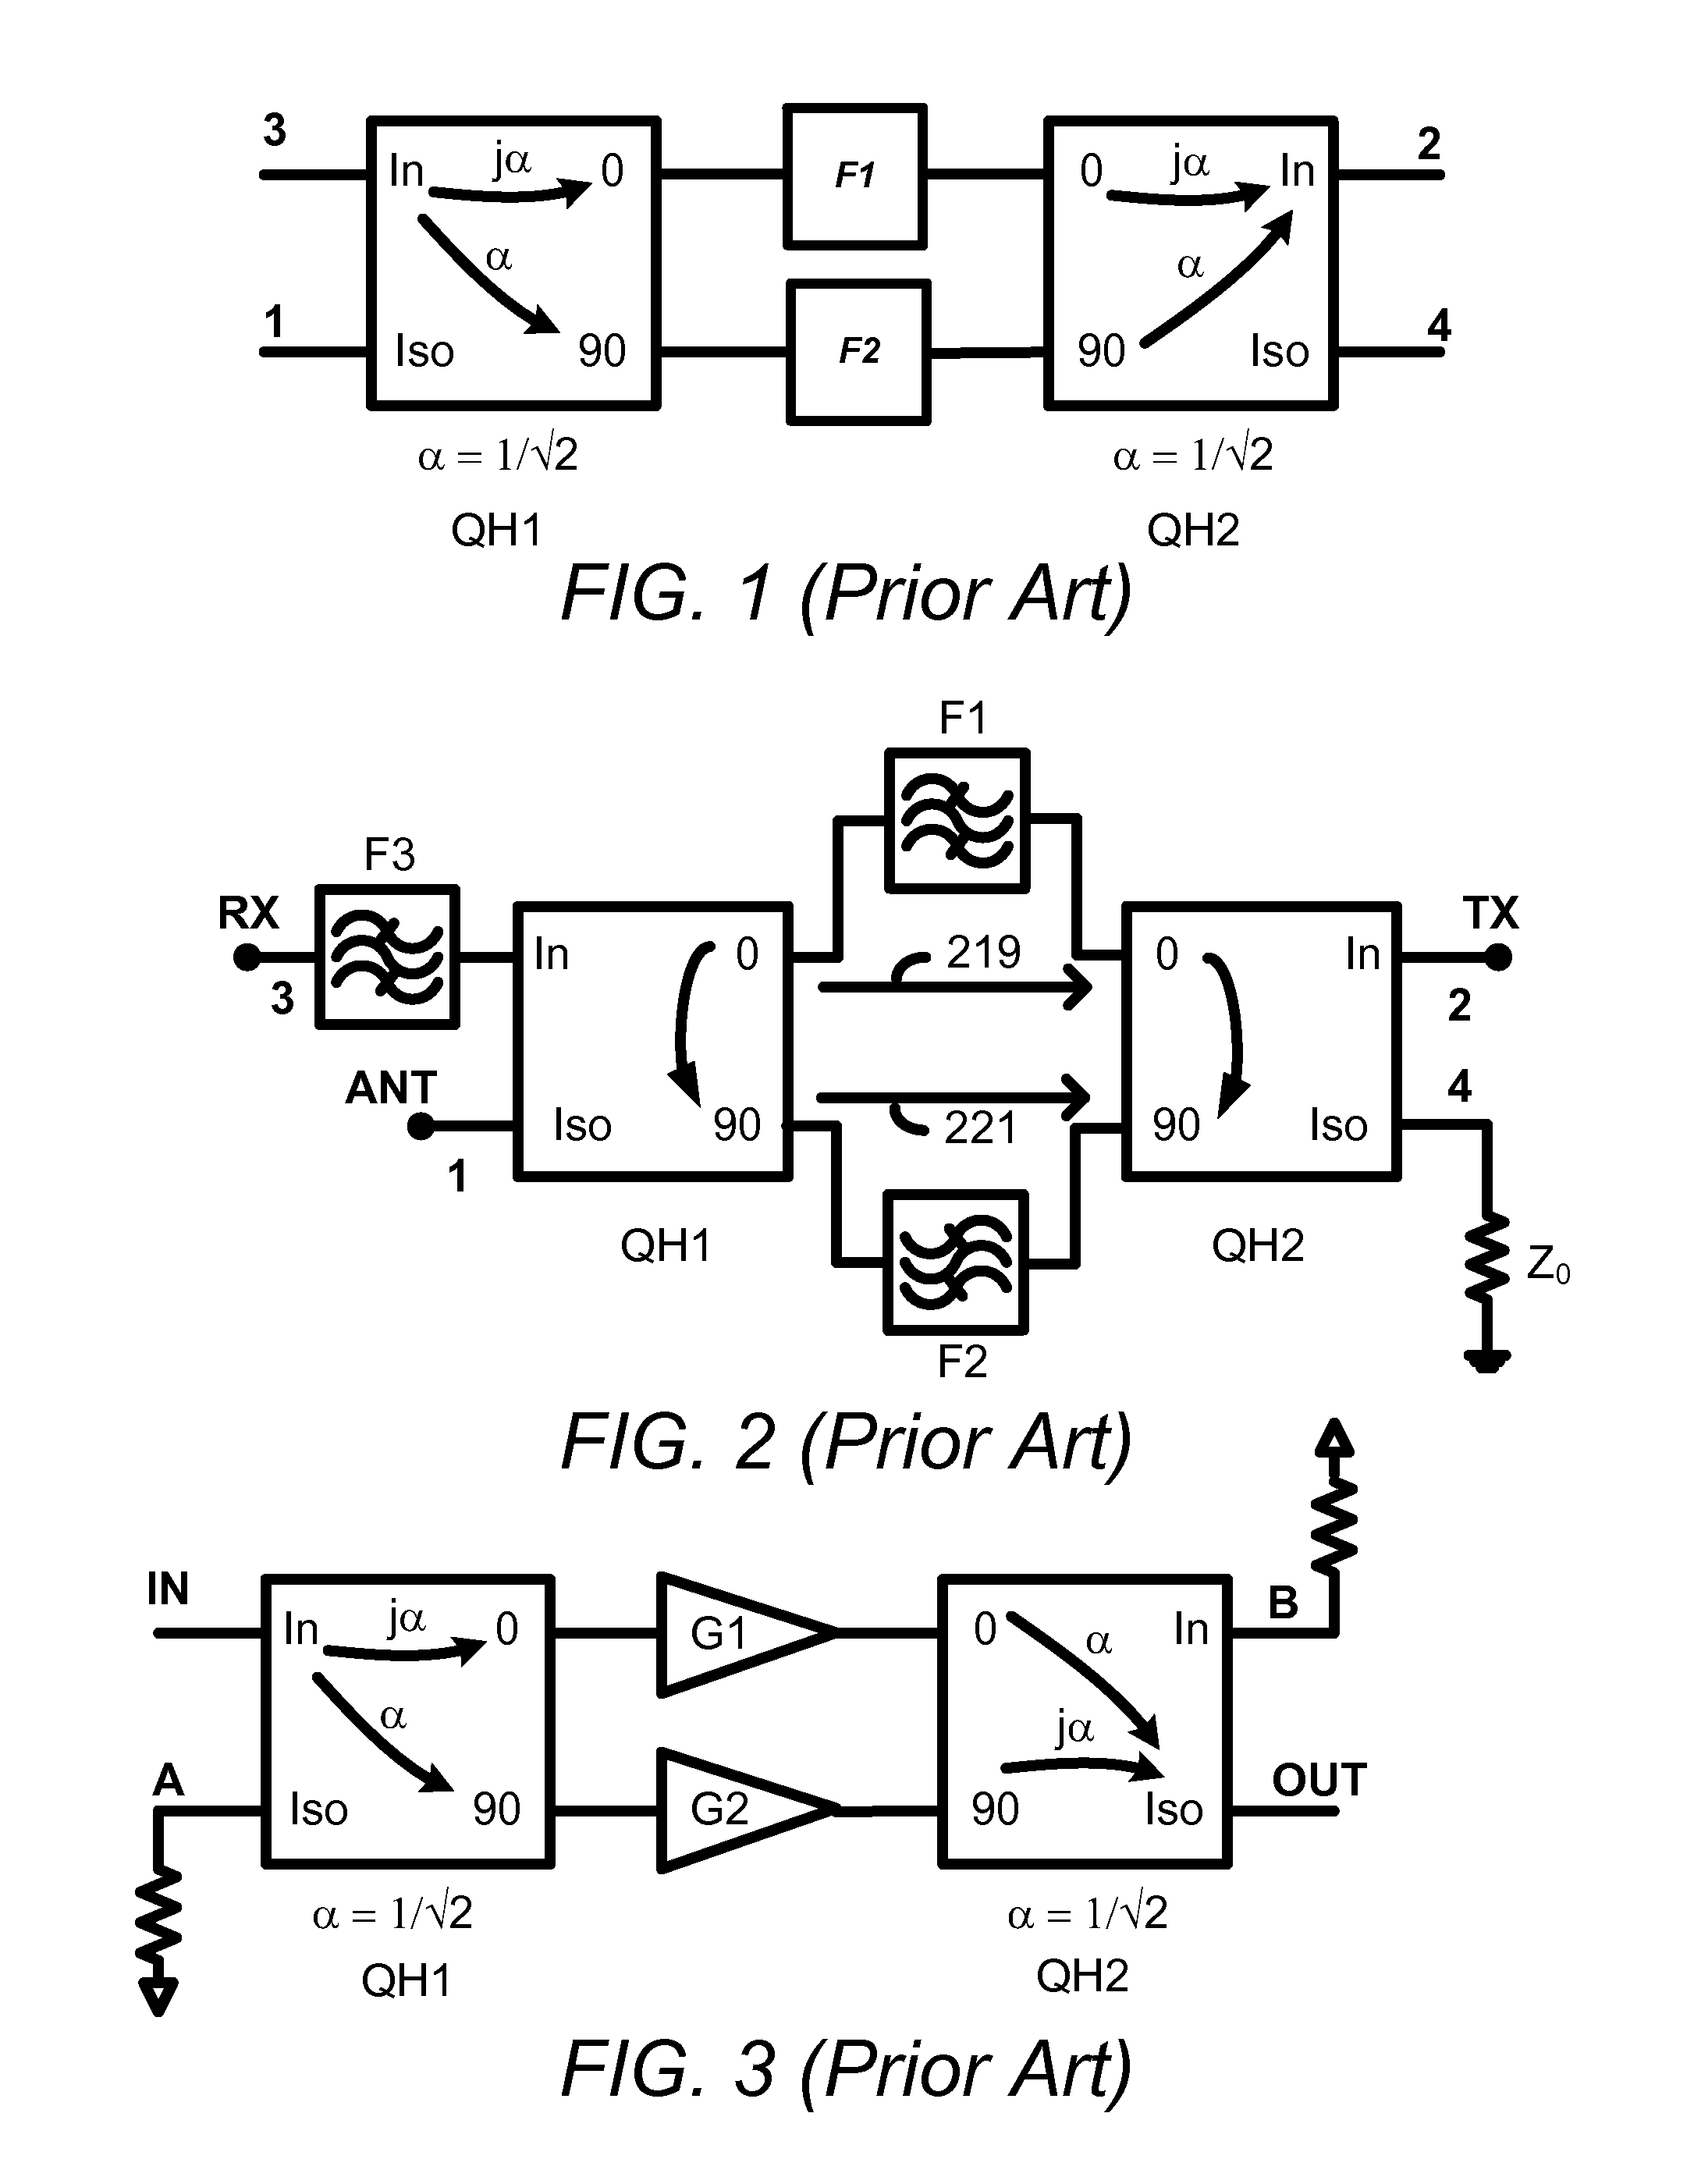 Enhancing Isolation and Impedance Matching in Hybrid-Based Cancellation Networks and Duplexers